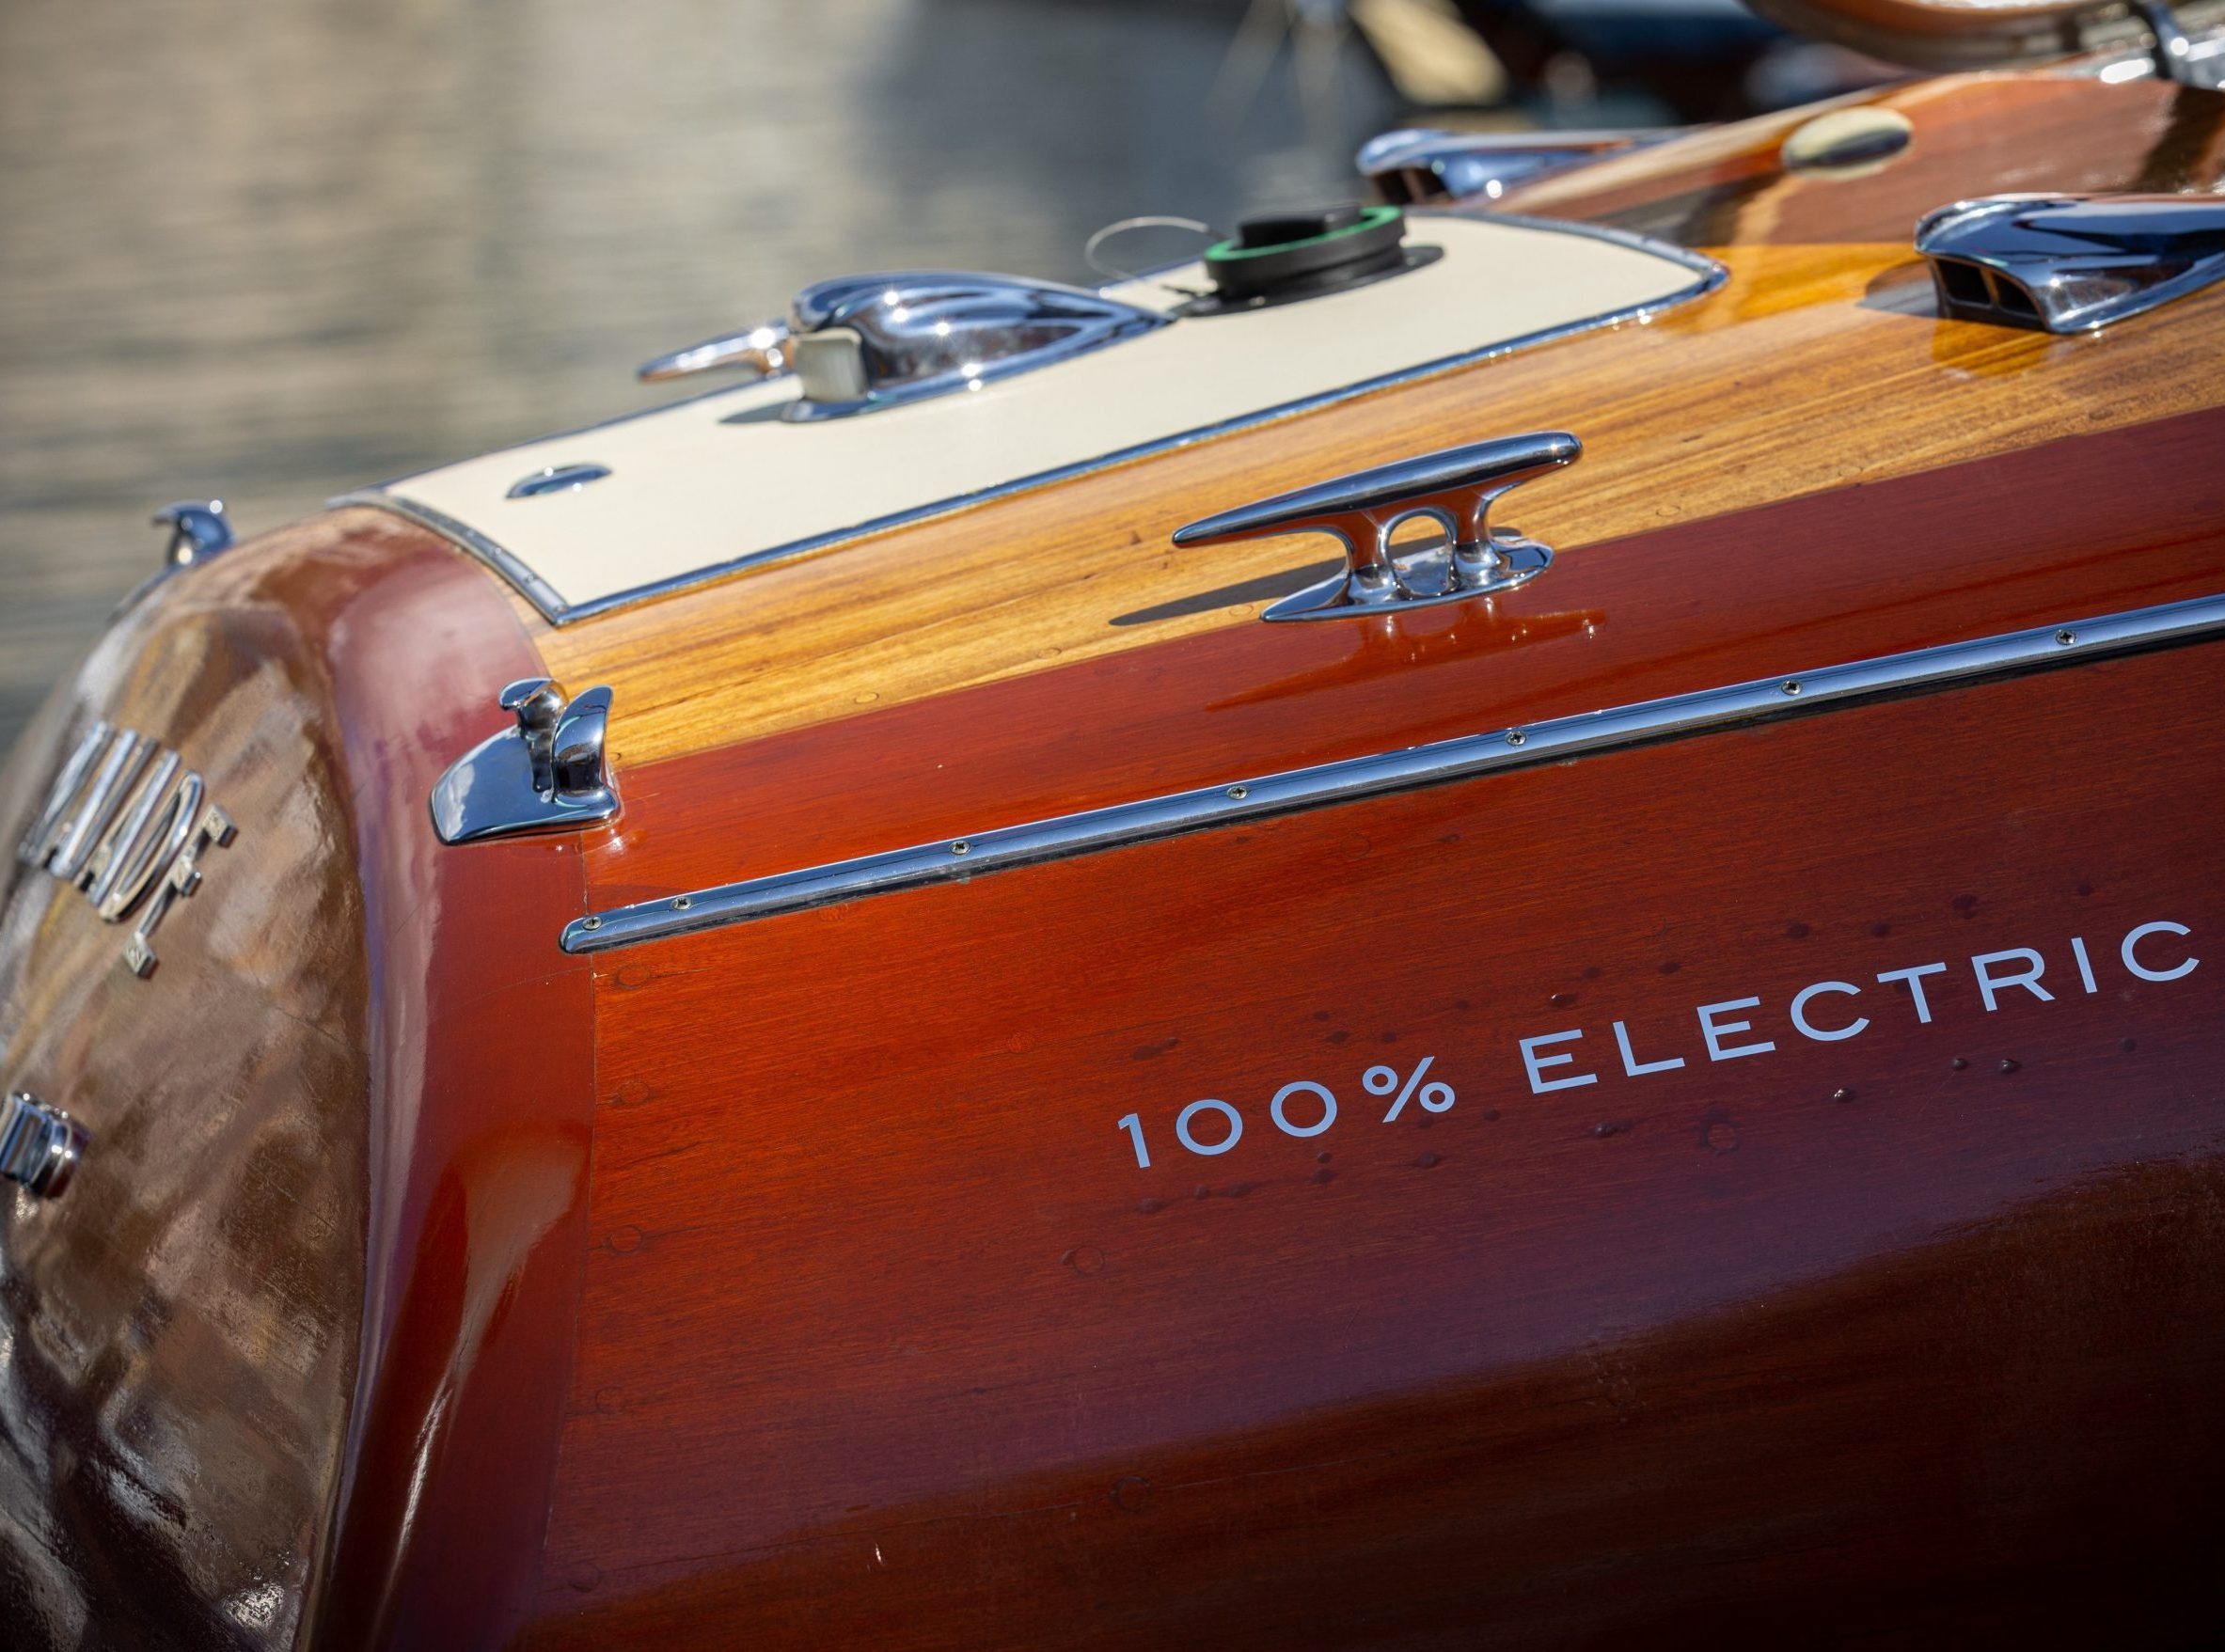 Bellini joins forces with Lanéva to electrify vintage Riva® boats.